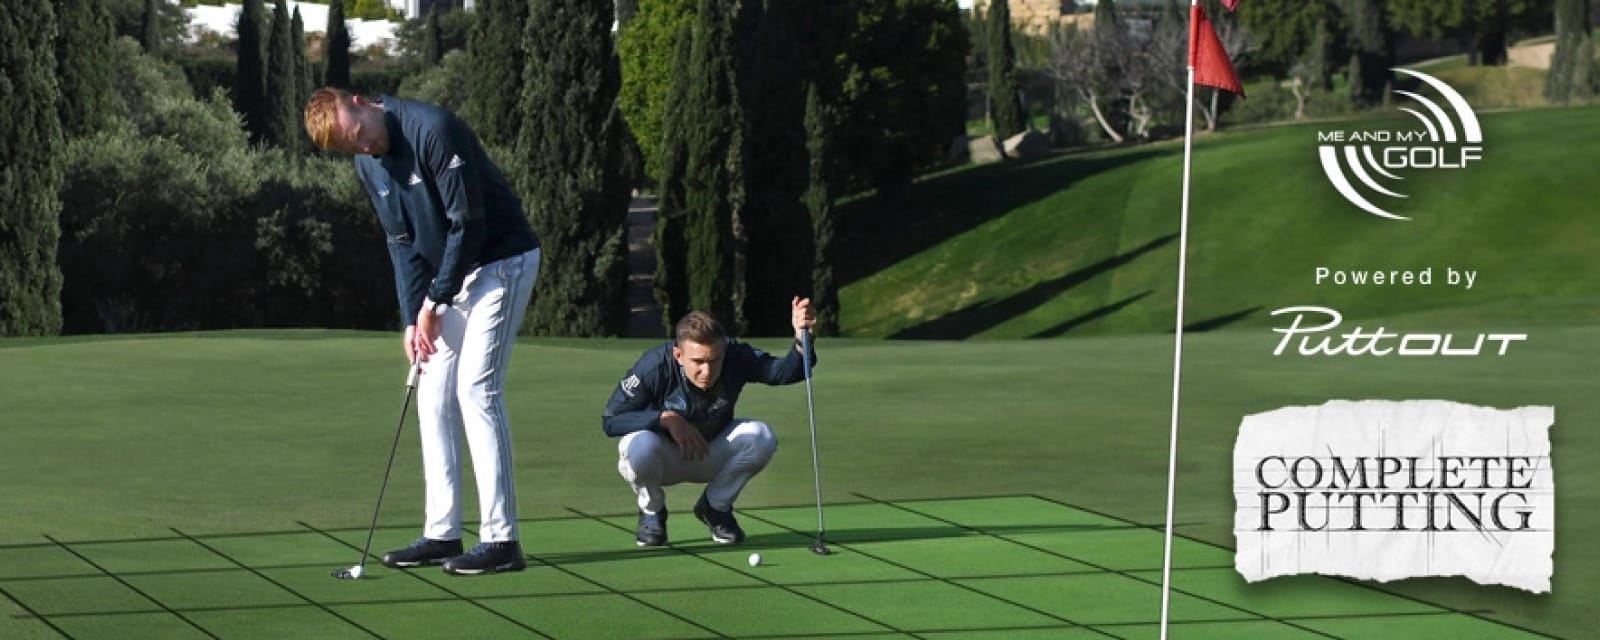 Golf Putting Coaching Plan: Lessons, Drills - Me And My Golf